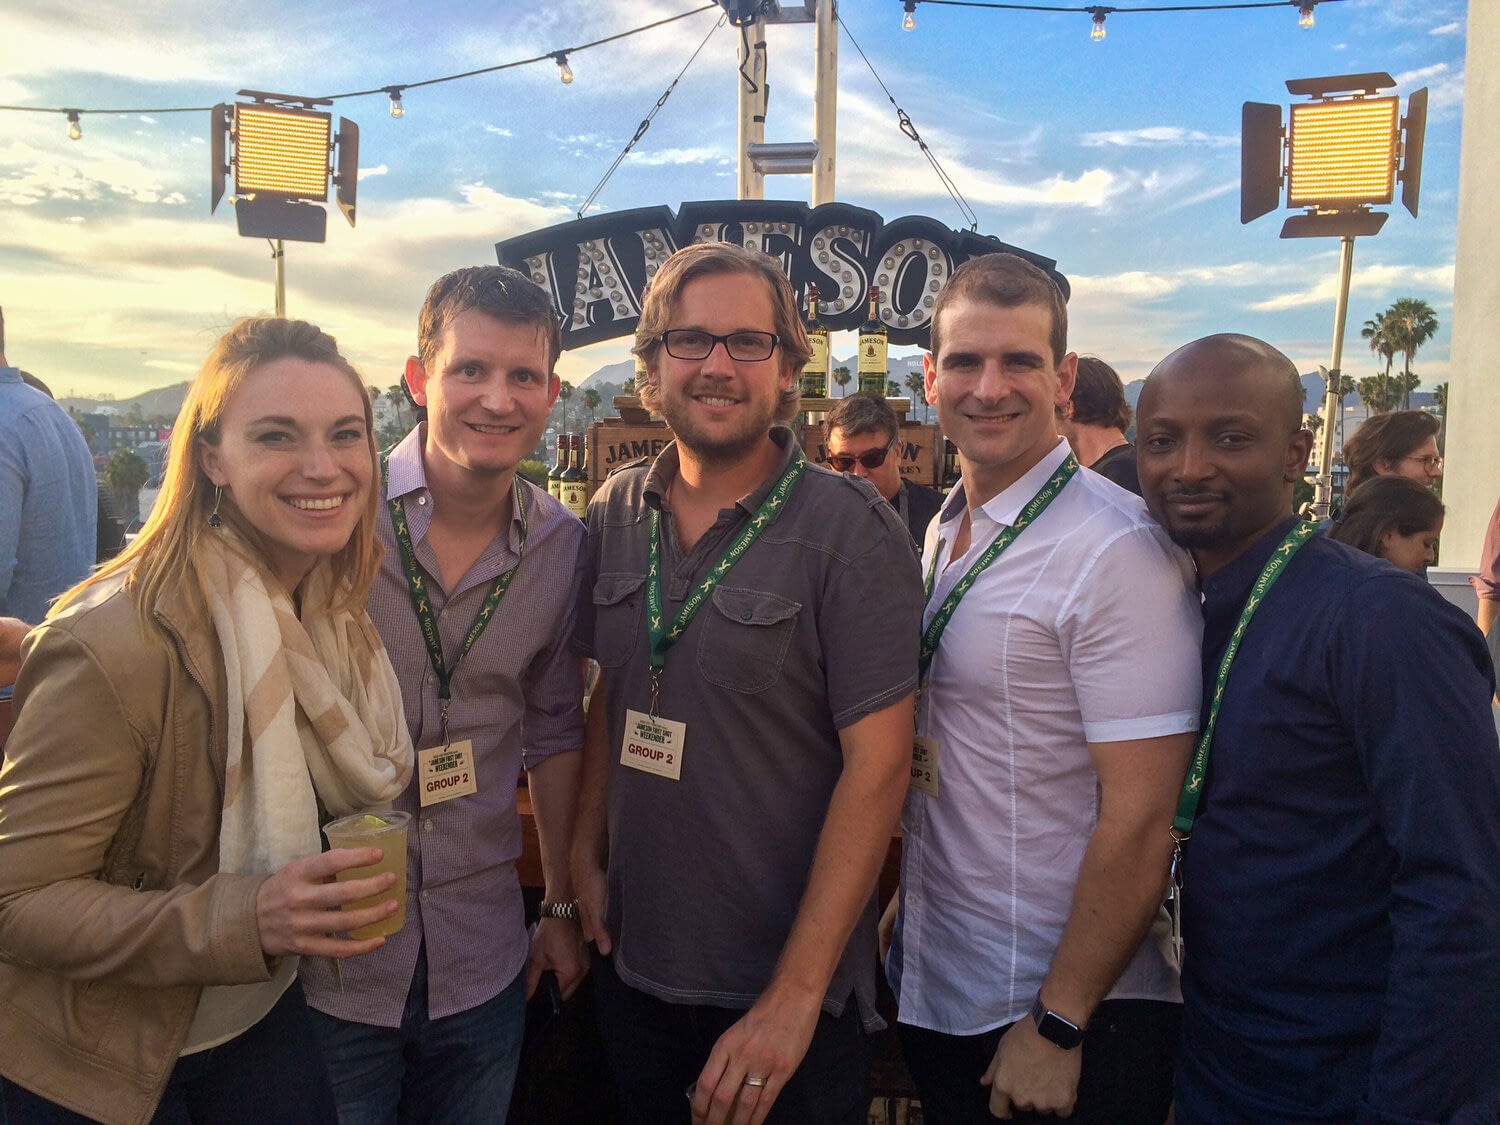 Alex with members of the BRC team at the Jameson "First Shot" workshop in LA, 2015